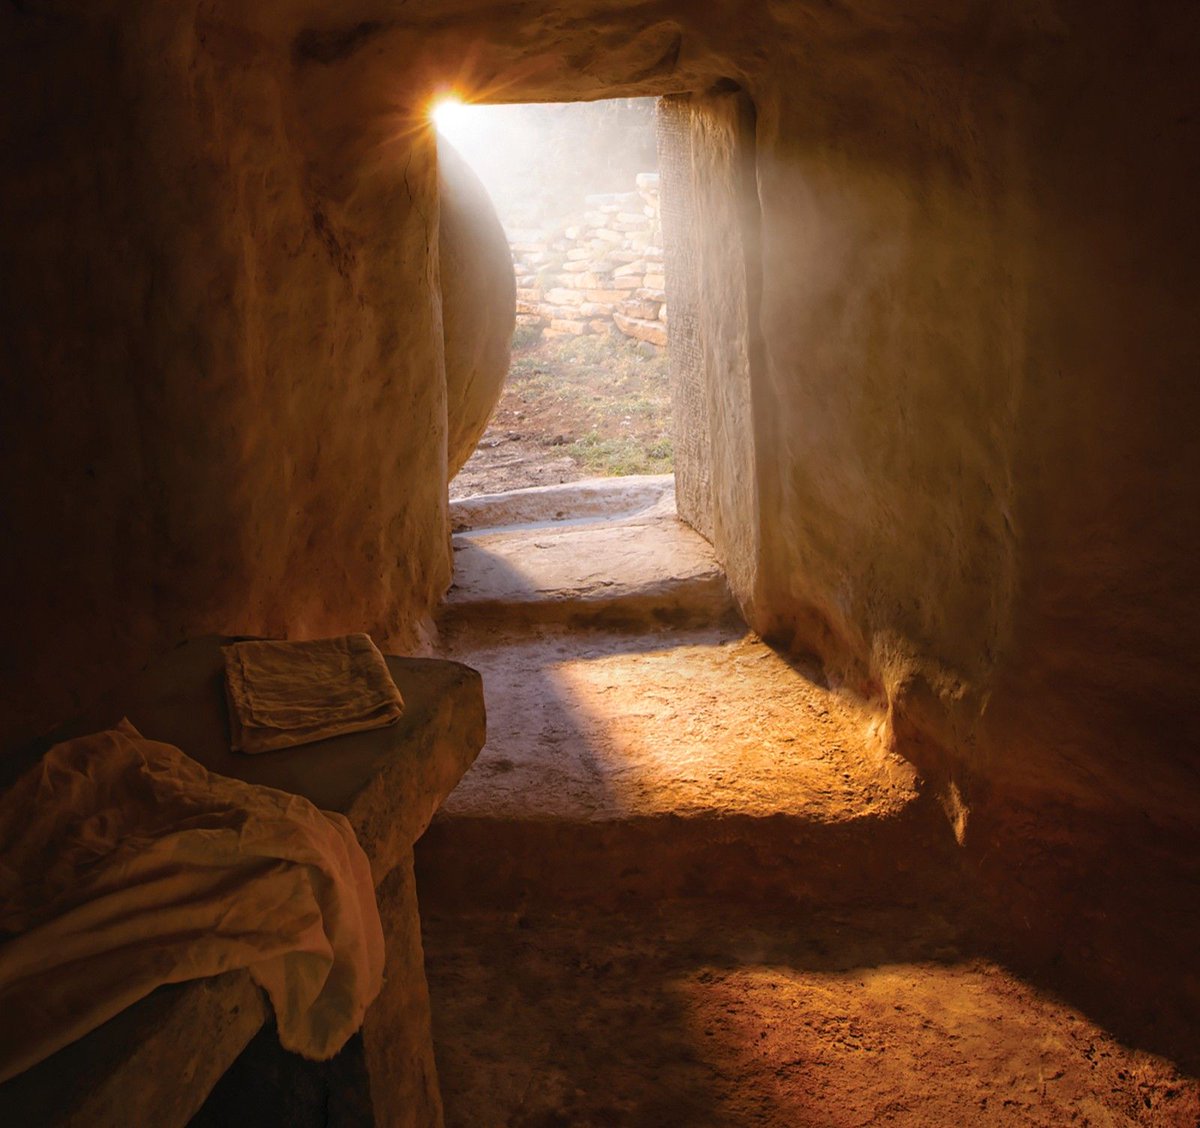 A testimony of the Resurrection of Jesus Christ is a source of both hope and determination. He lives, and because of His sacrifice, we will be resurrected and sanctified. Jesus is the risen Christ, our Savior, and our perfect example and guide to eternal life.